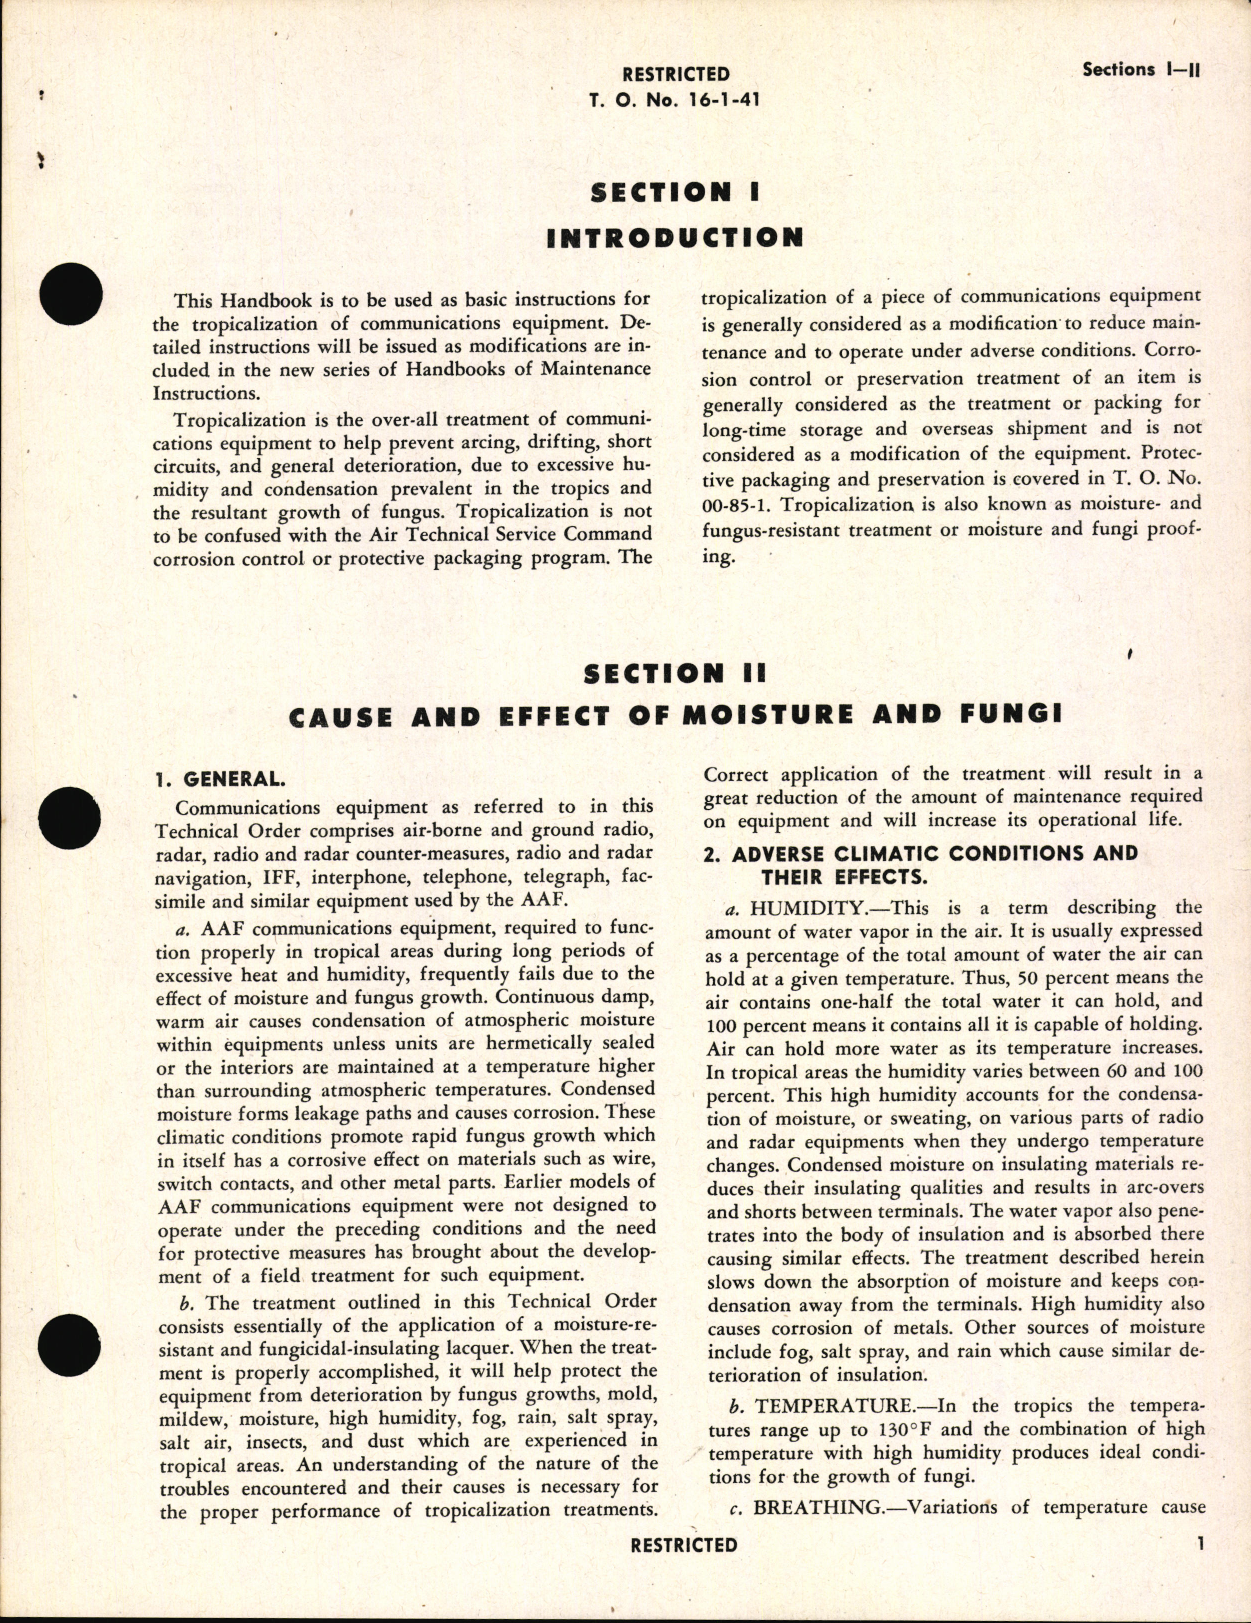 Sample page 5 from AirCorps Library document: General Instructions for Tropicalization of Communications Equipment